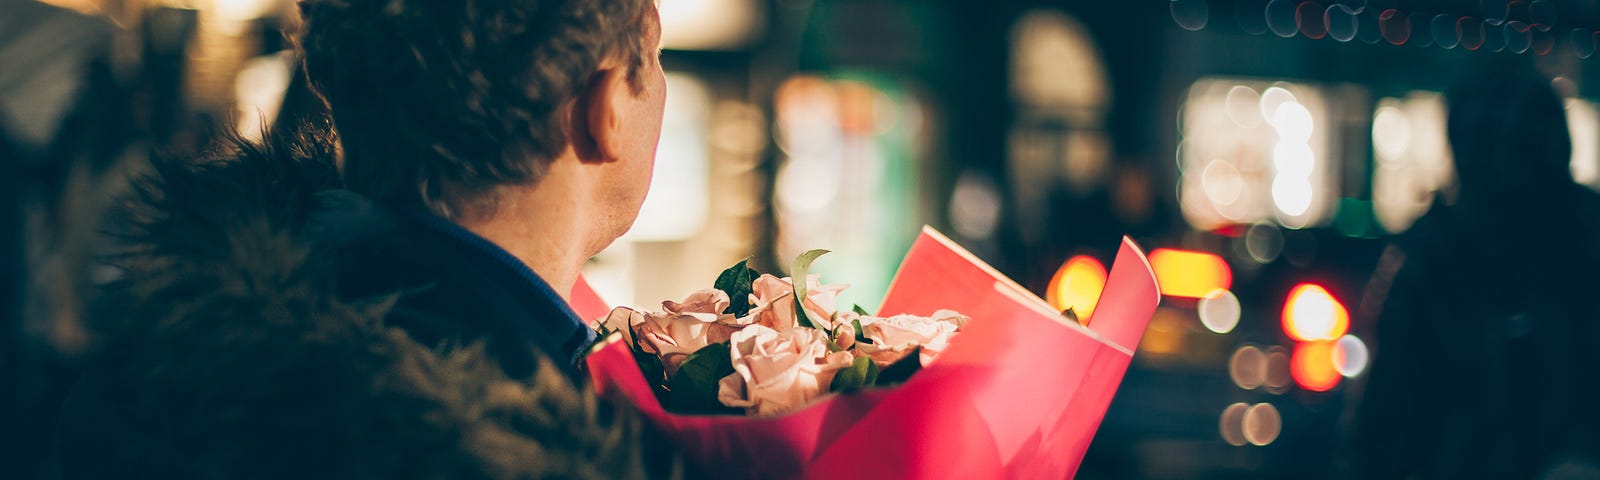 A man holding flowers waiting for someone to arrive.